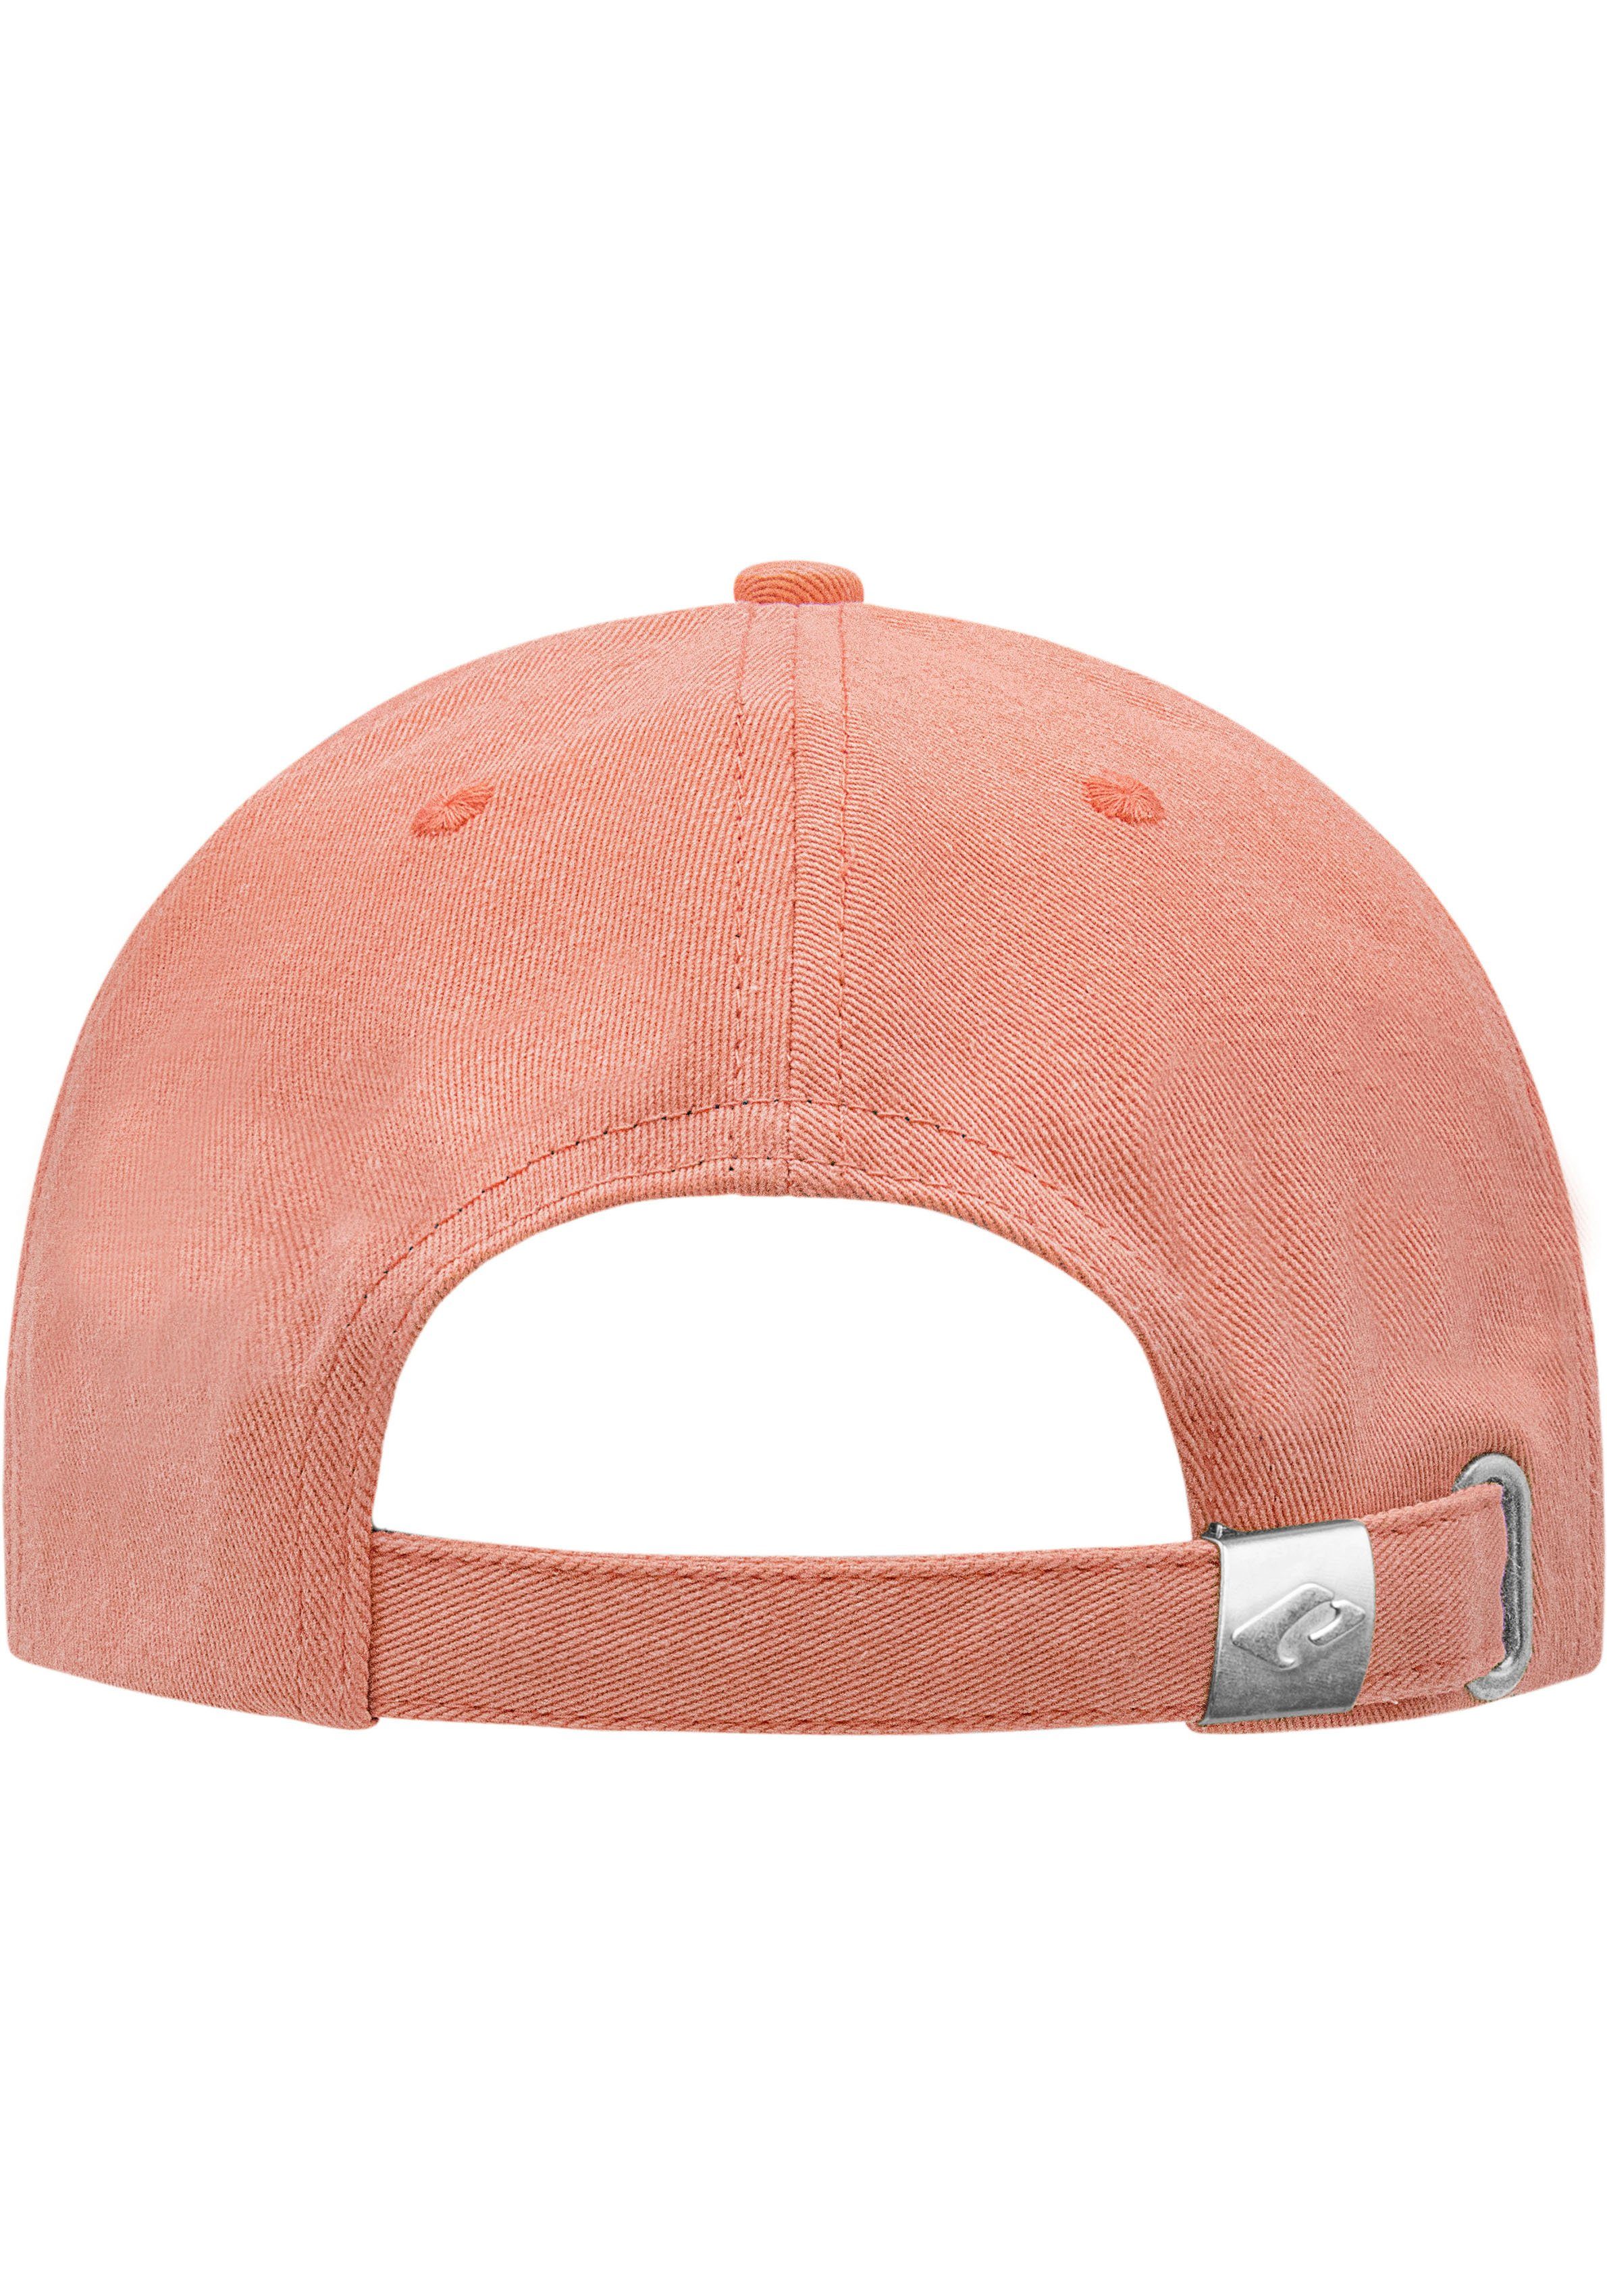 chillouts Baseball Arklow Hat coral Cap